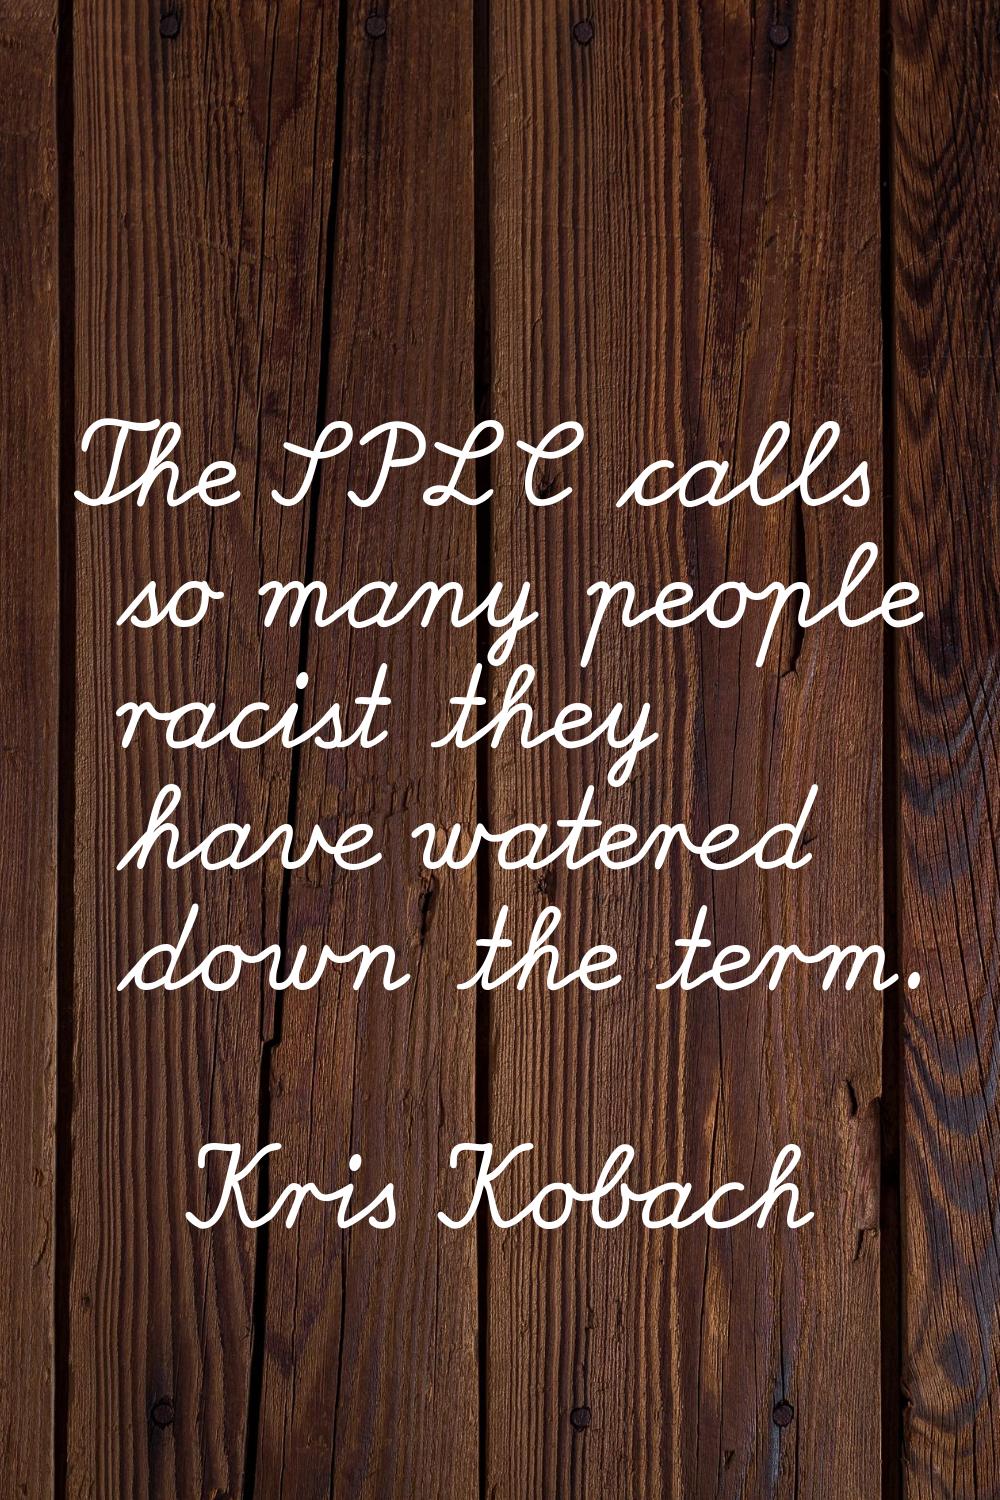 The SPLC calls so many people racist they have watered down the term.